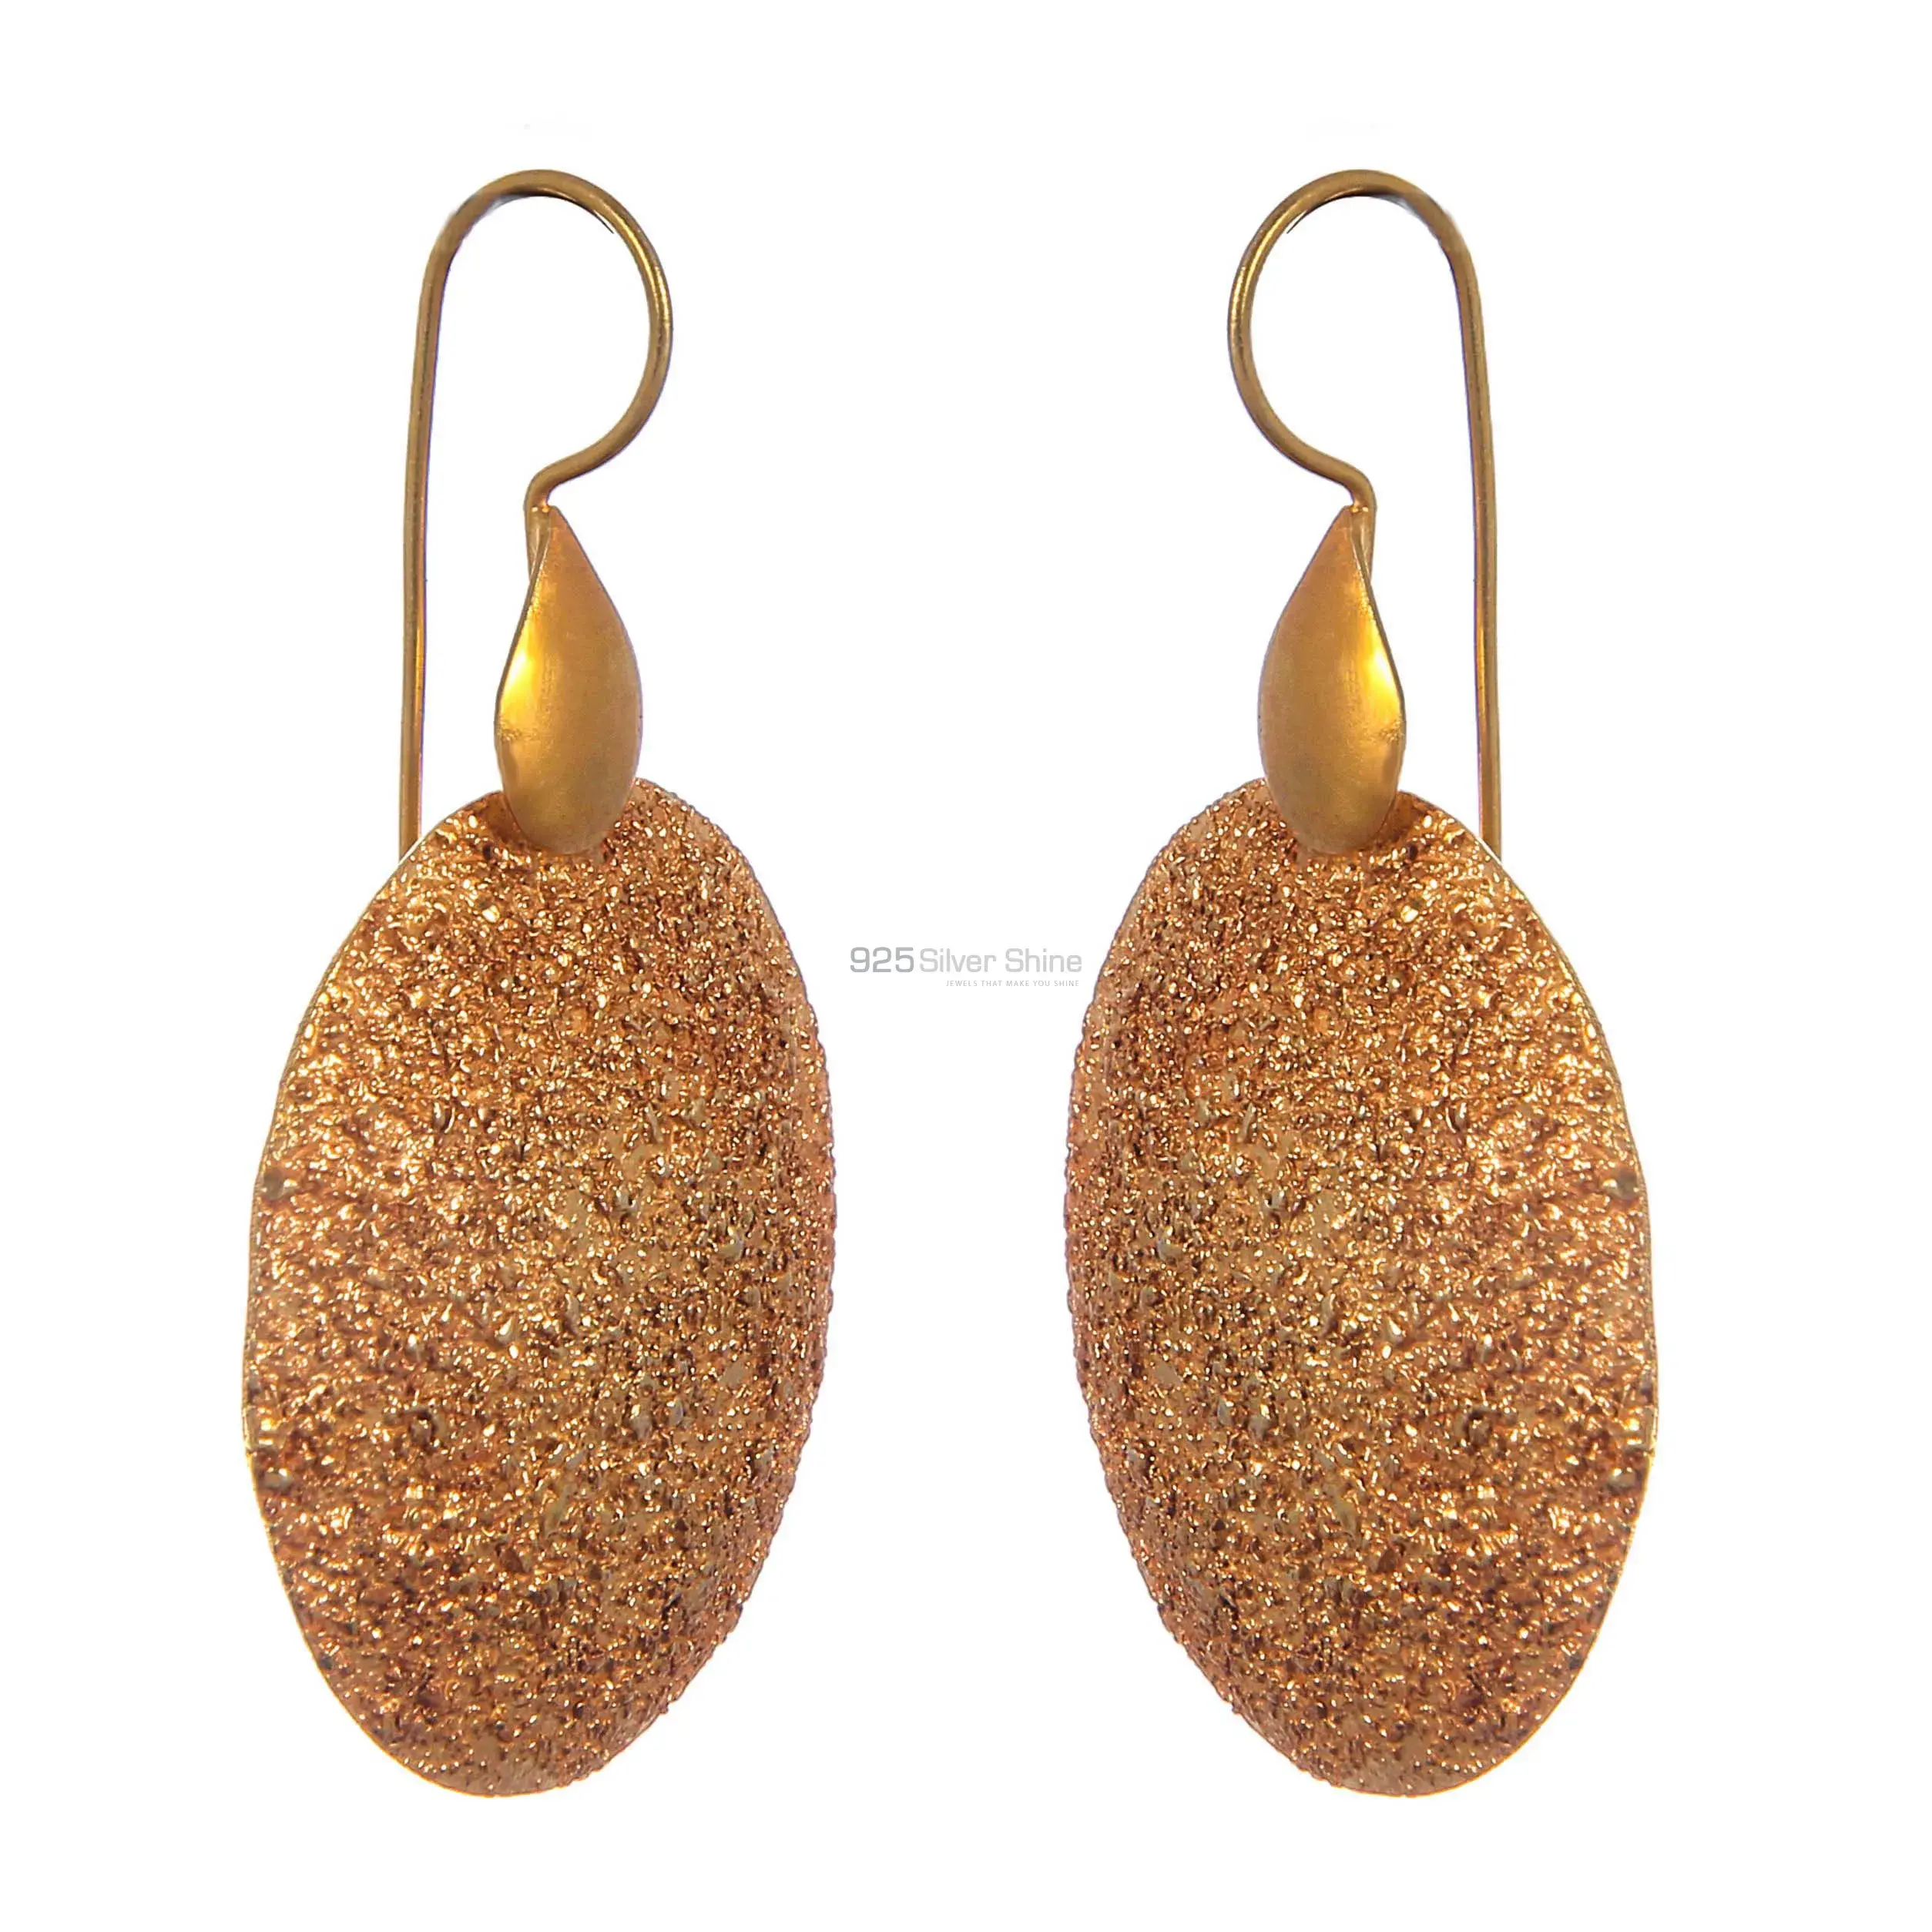 Unique 925 Sterling Silver Earrings Wholesaler In Gold Plated 925SE285_0